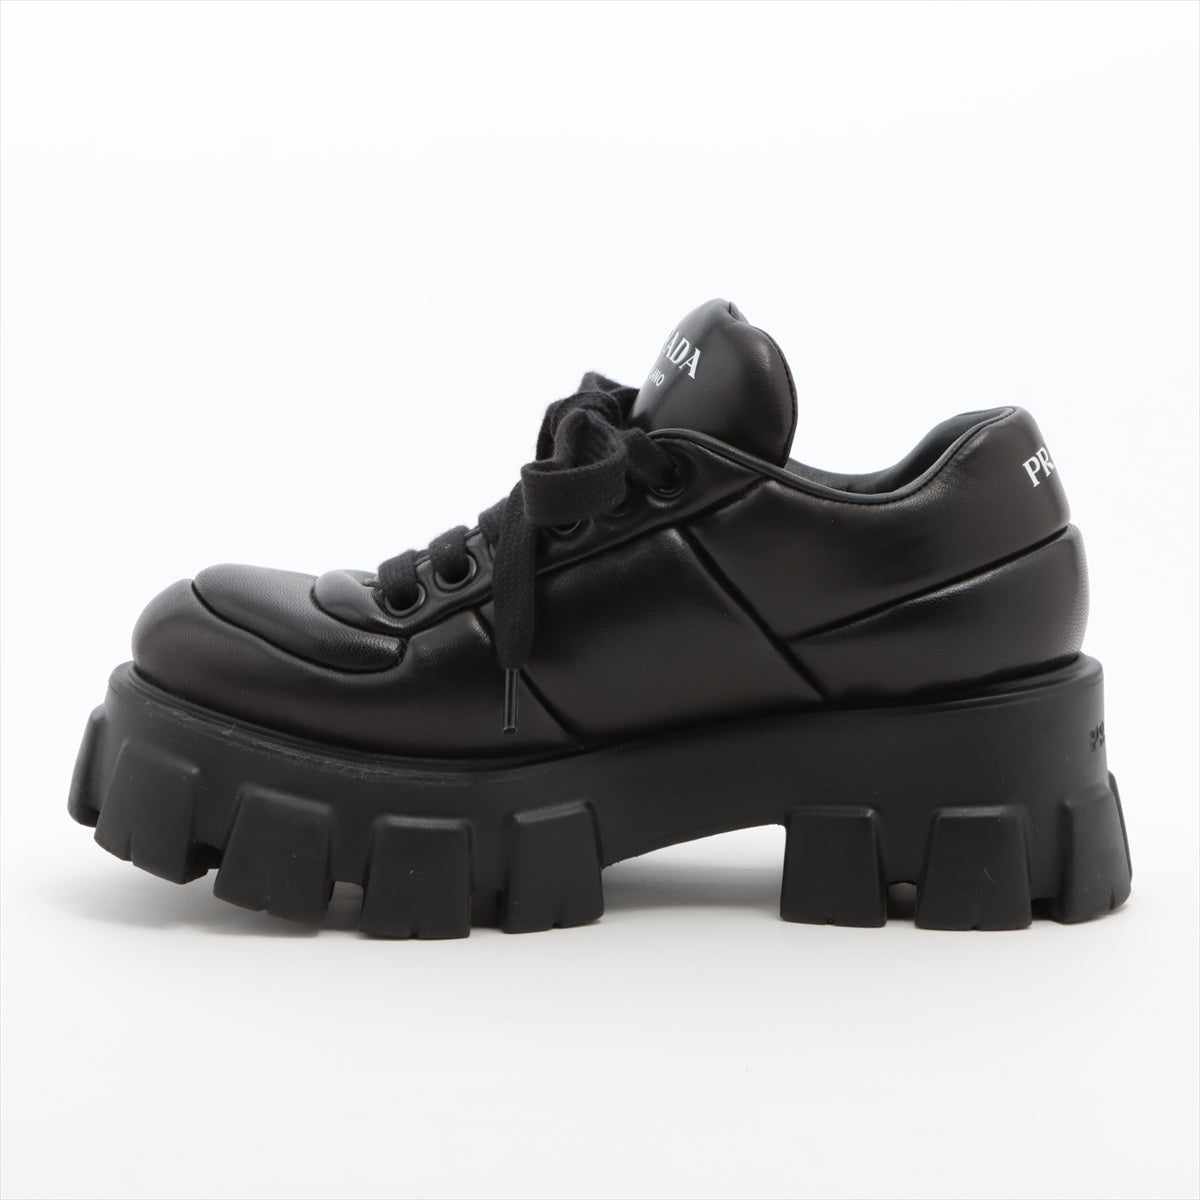 Prada Monolith Leather Sneakers 37 Ladies' Black 1E119N Triangular logo plate There is a box